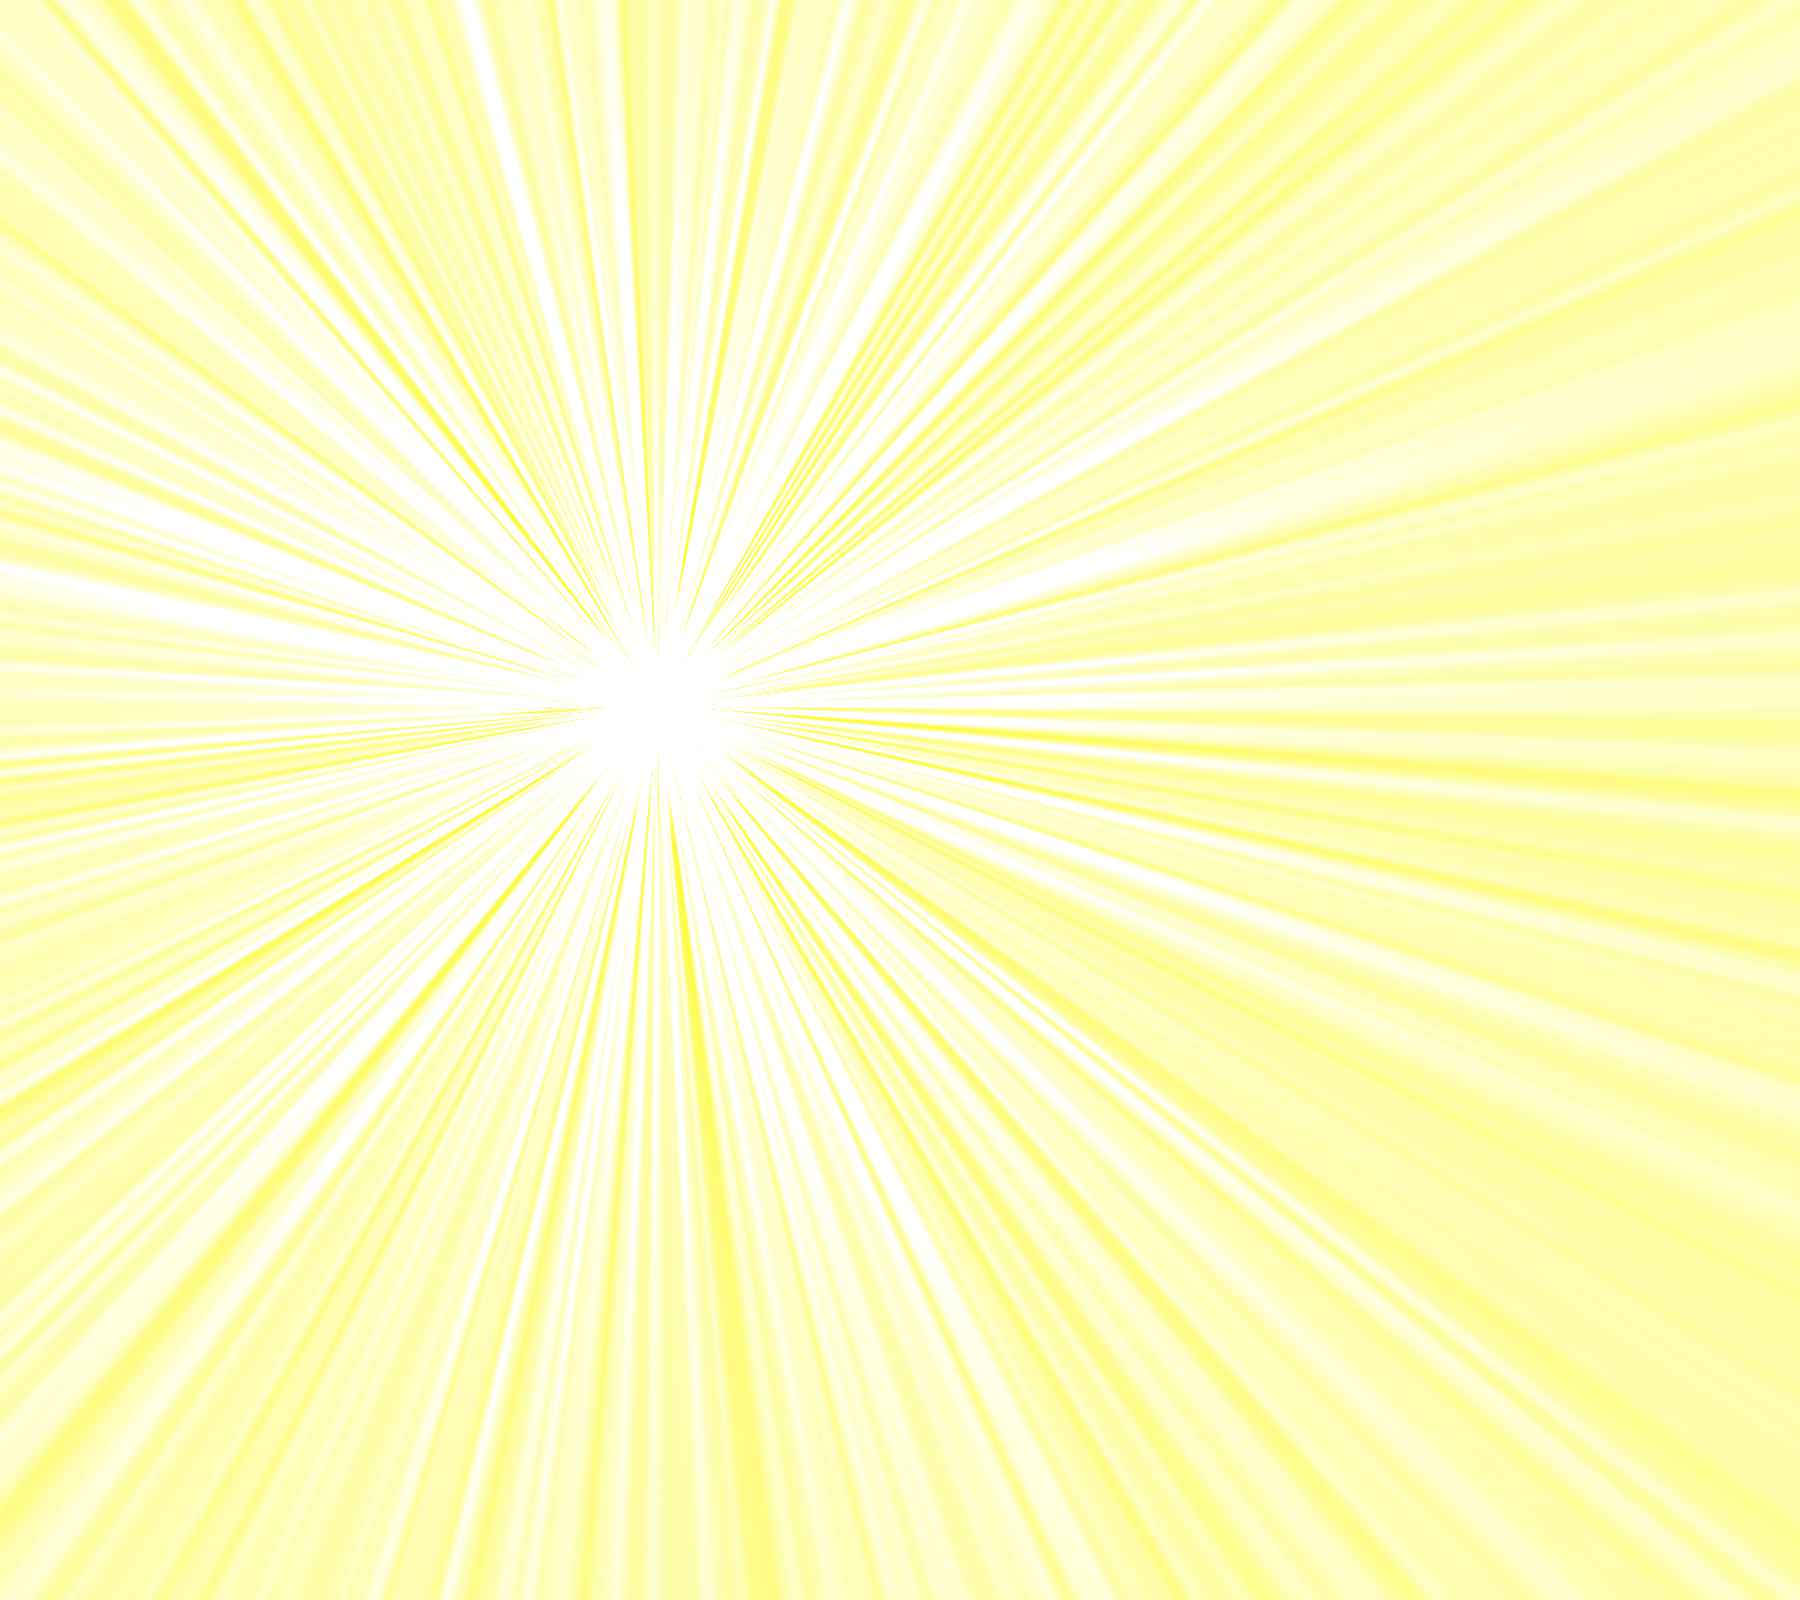 A Yellow Sunburst Background With Rays